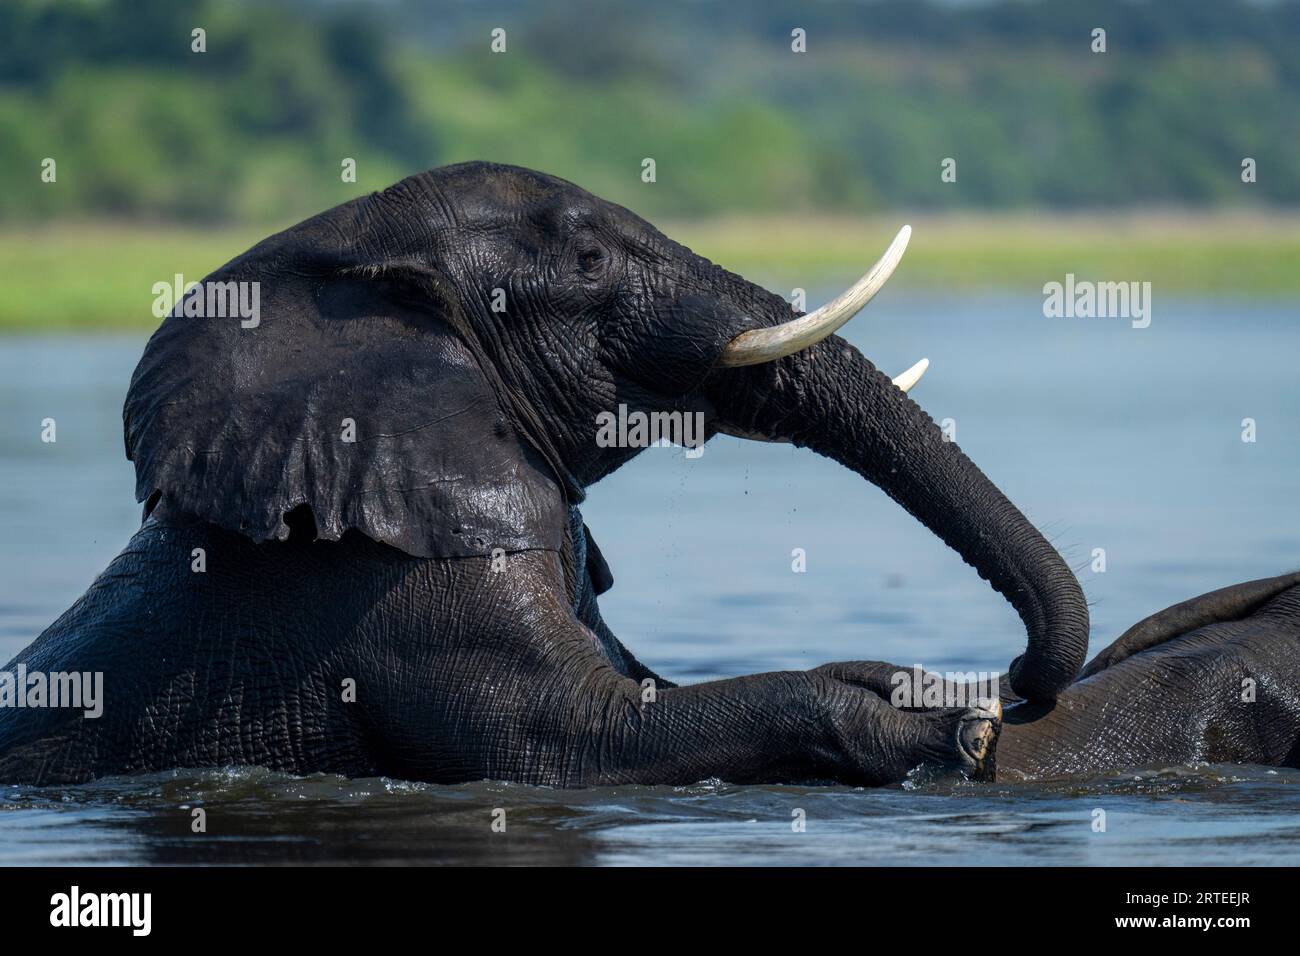 Close-up of African bush elephants (Loxodonta africana) mounting another in the river in Chobe National Park; Chobe, Botswana Stock Photo